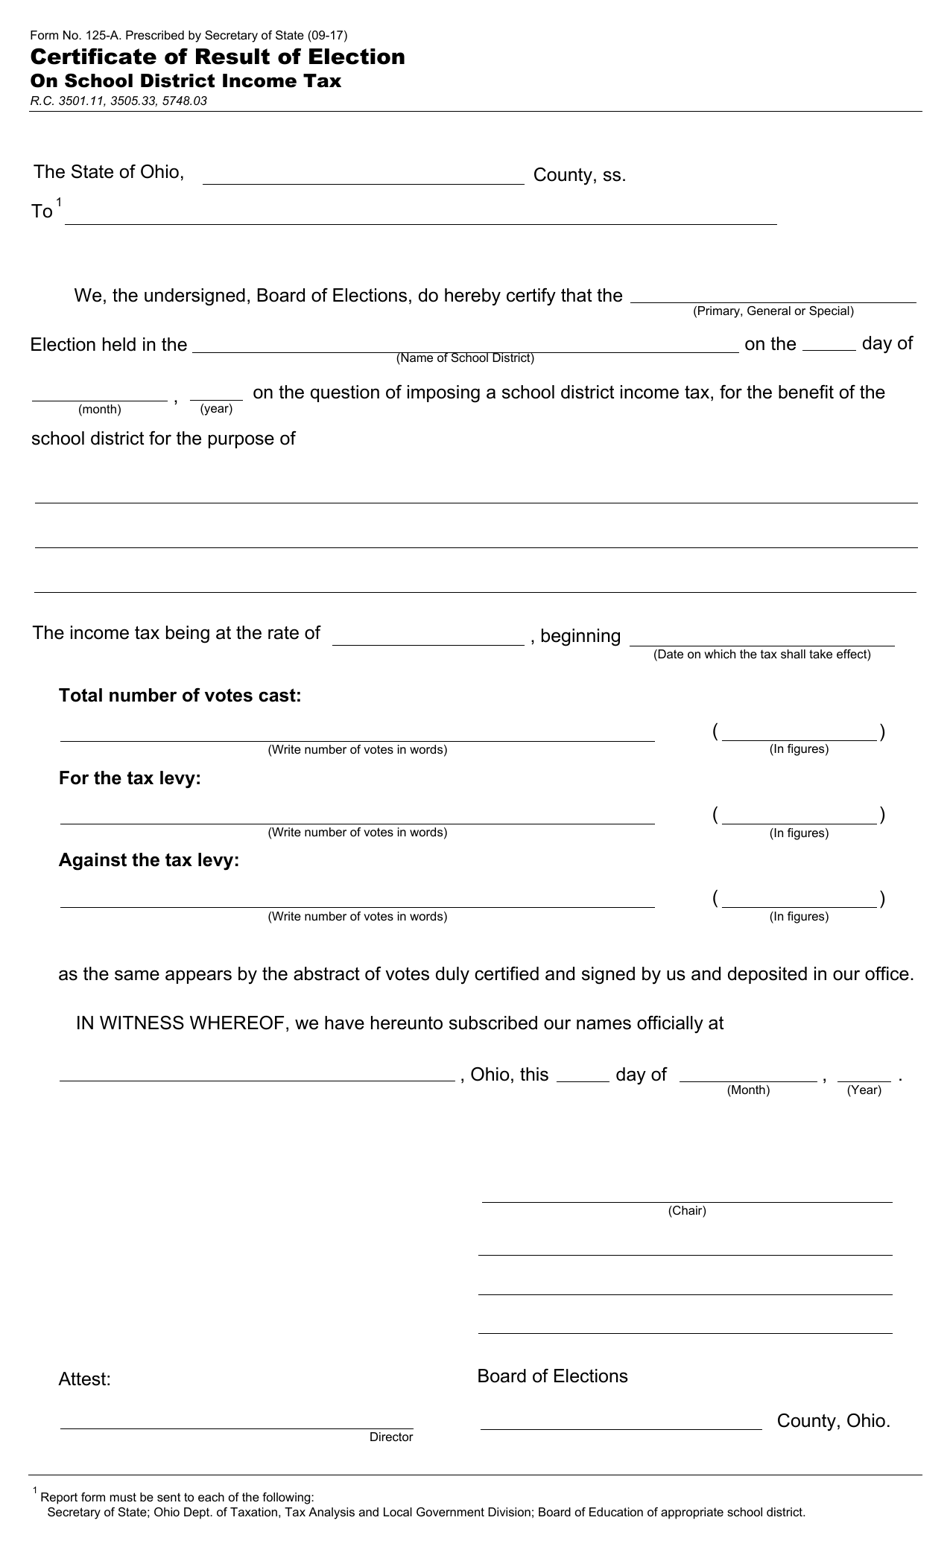 Form 125-A Certificate of Result of Election on School District Income Tax - Ohio, Page 1